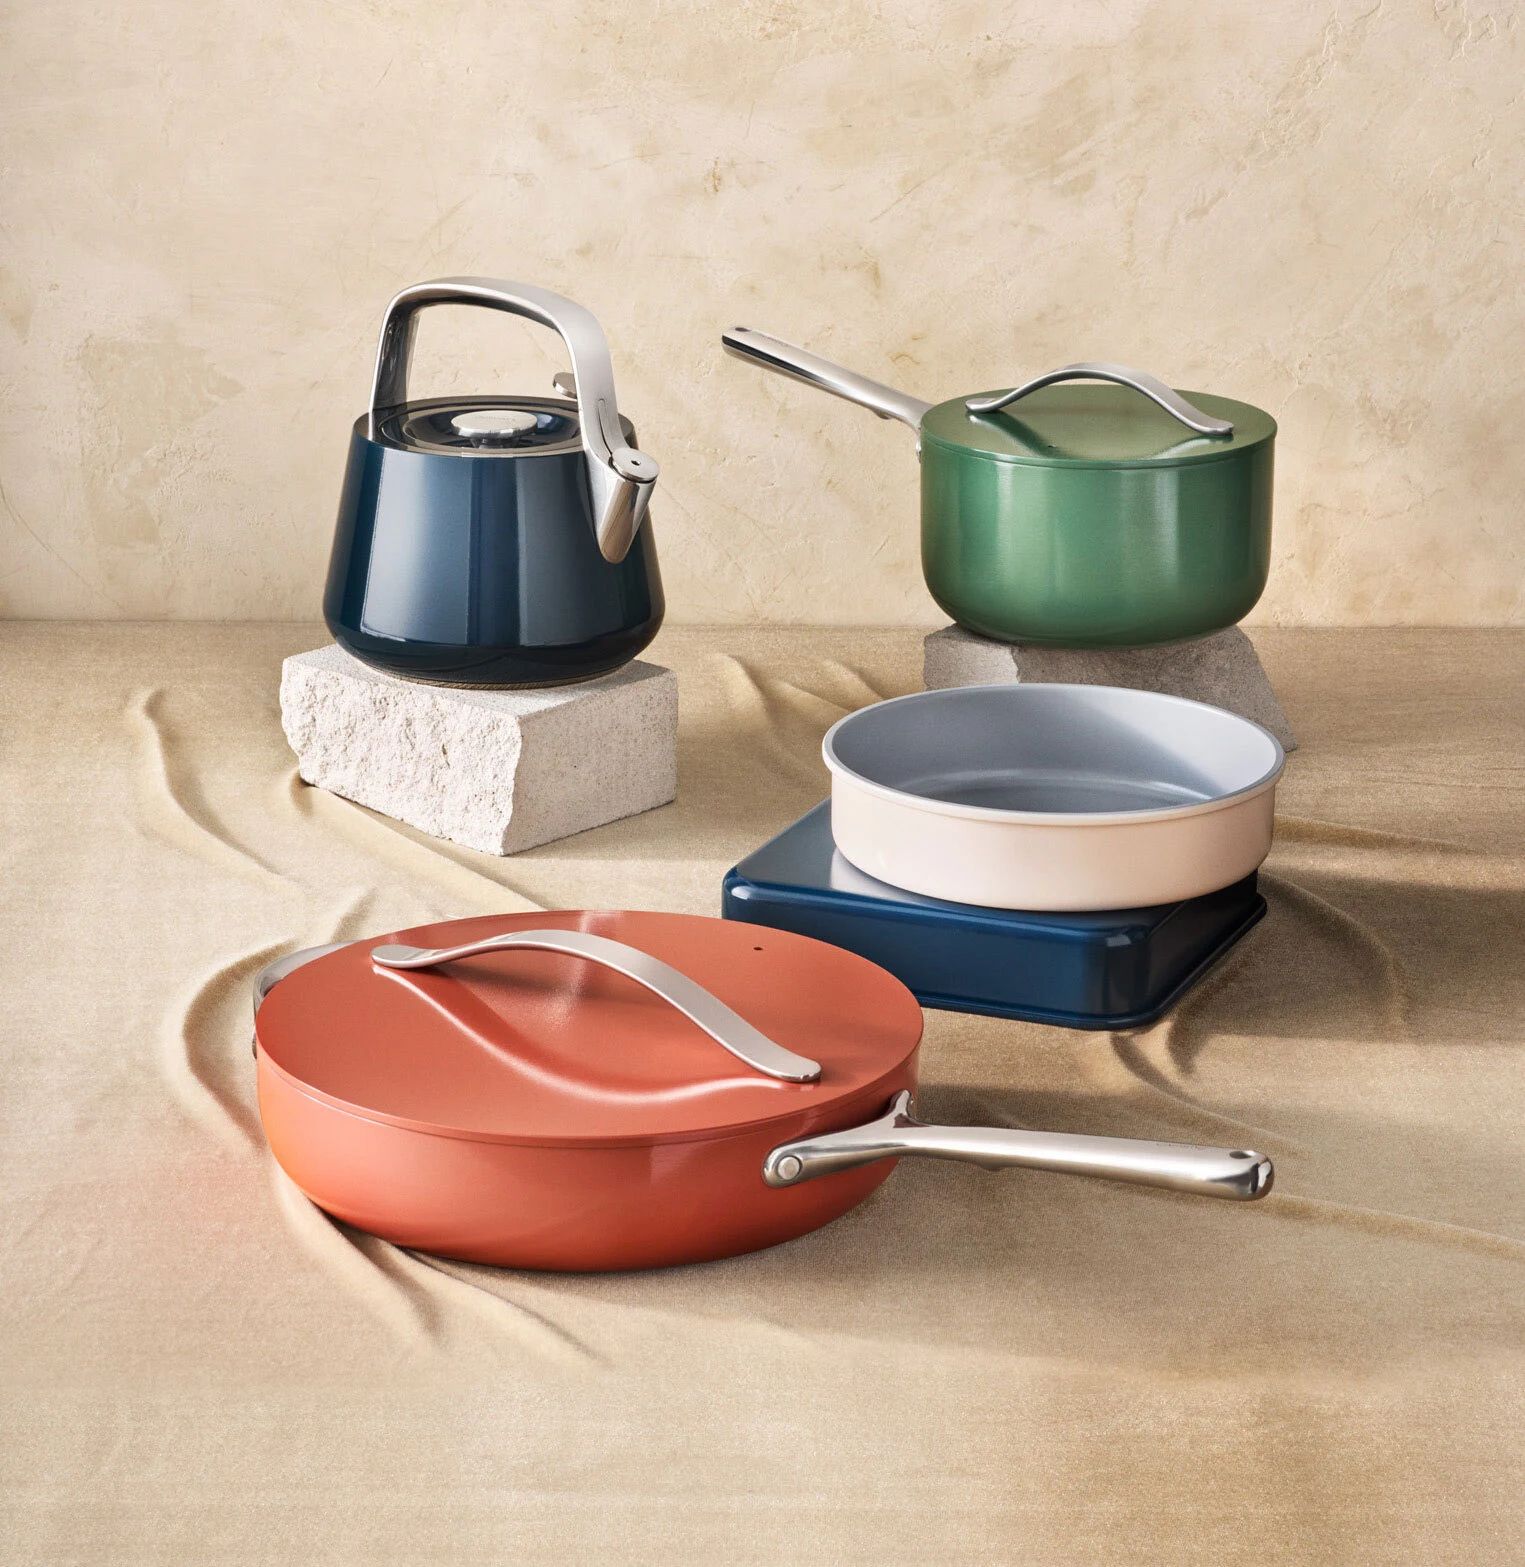 Caraway cookware holiday sale: Save up to 20% on pots, pans